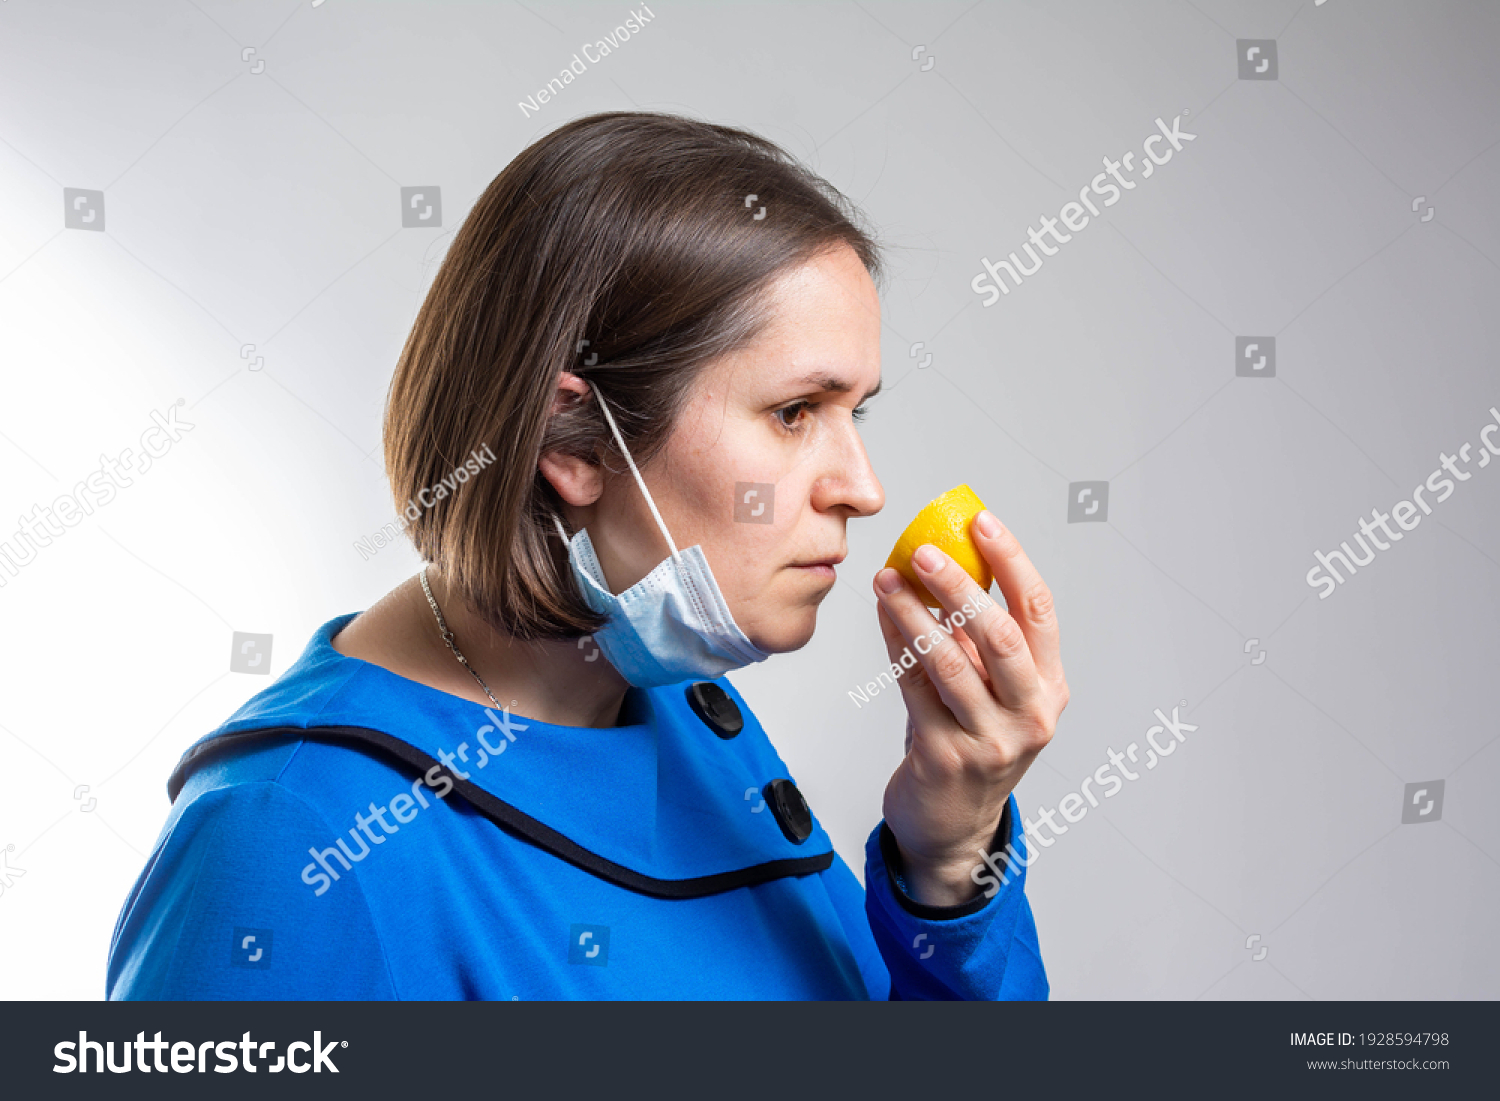 Anosmia or smell blindness, loss of the ability to smell, one of the possible symptoms of covid-19, infectious disease caused by corona virus. Man Trying to Sense Smell of a Lemon, side view. #1928594798